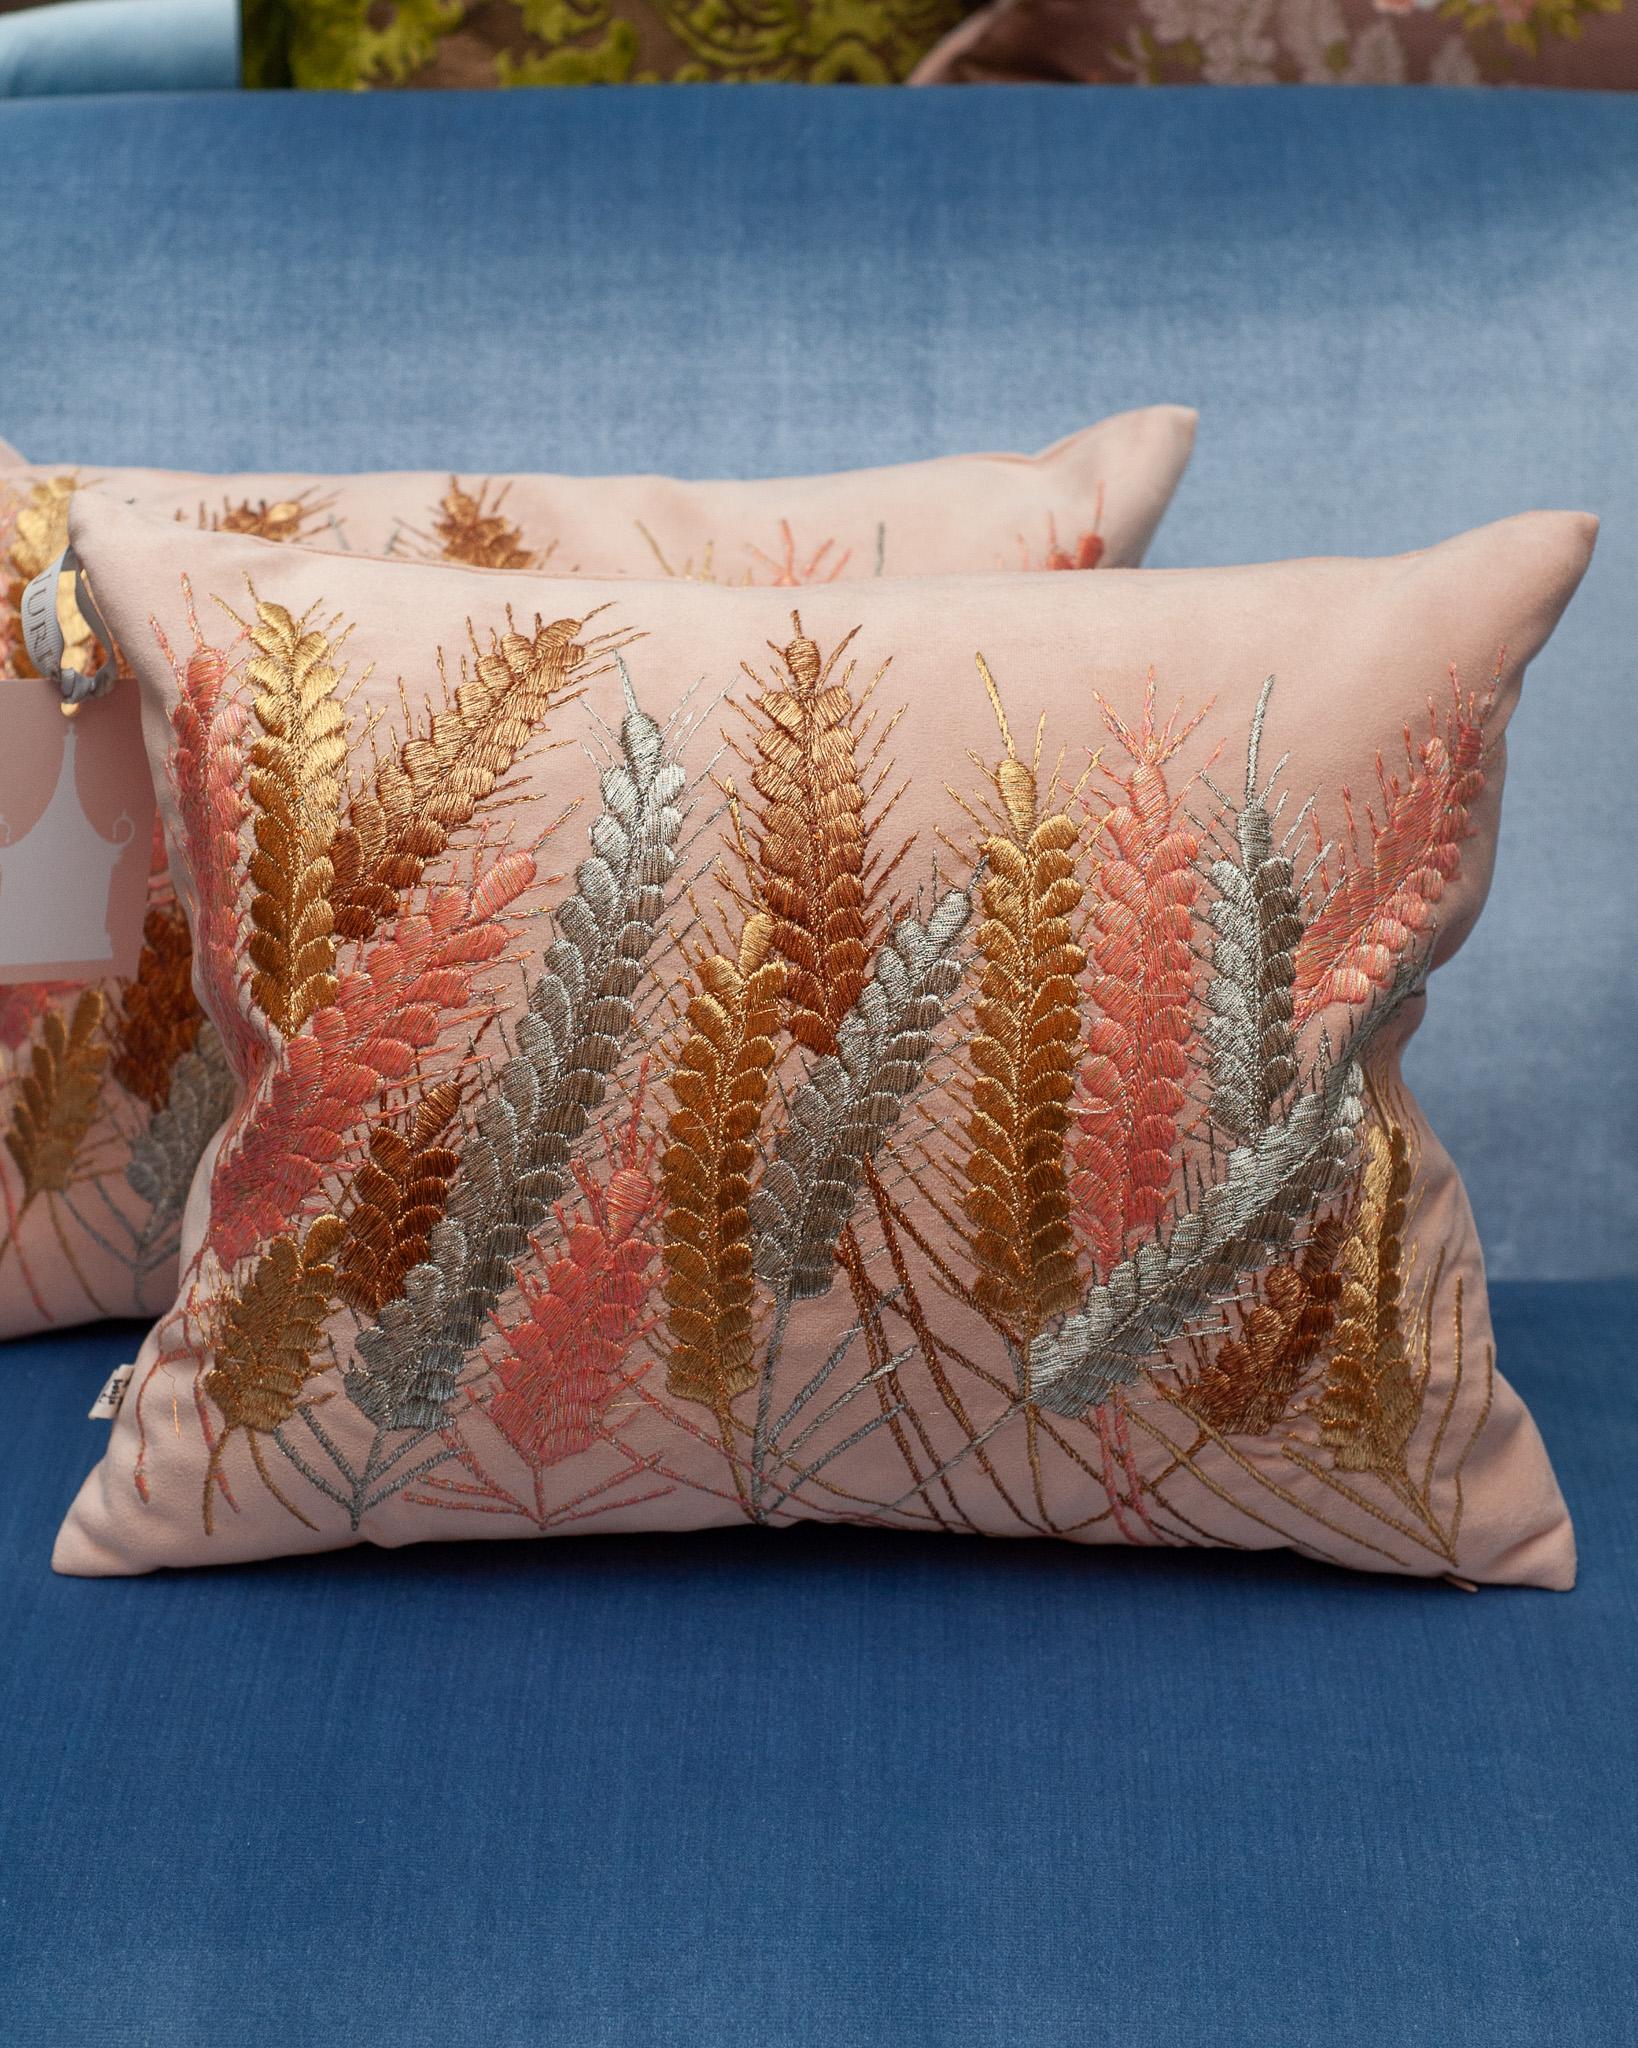 A stunning embroidered pillow with wheat motifs, ornately embroidered with gold, copper, and silver toned metallic thread on an ultrasuede backing. Casual yet elegant, a new pair of pillows can transform a space with a modest investment. 